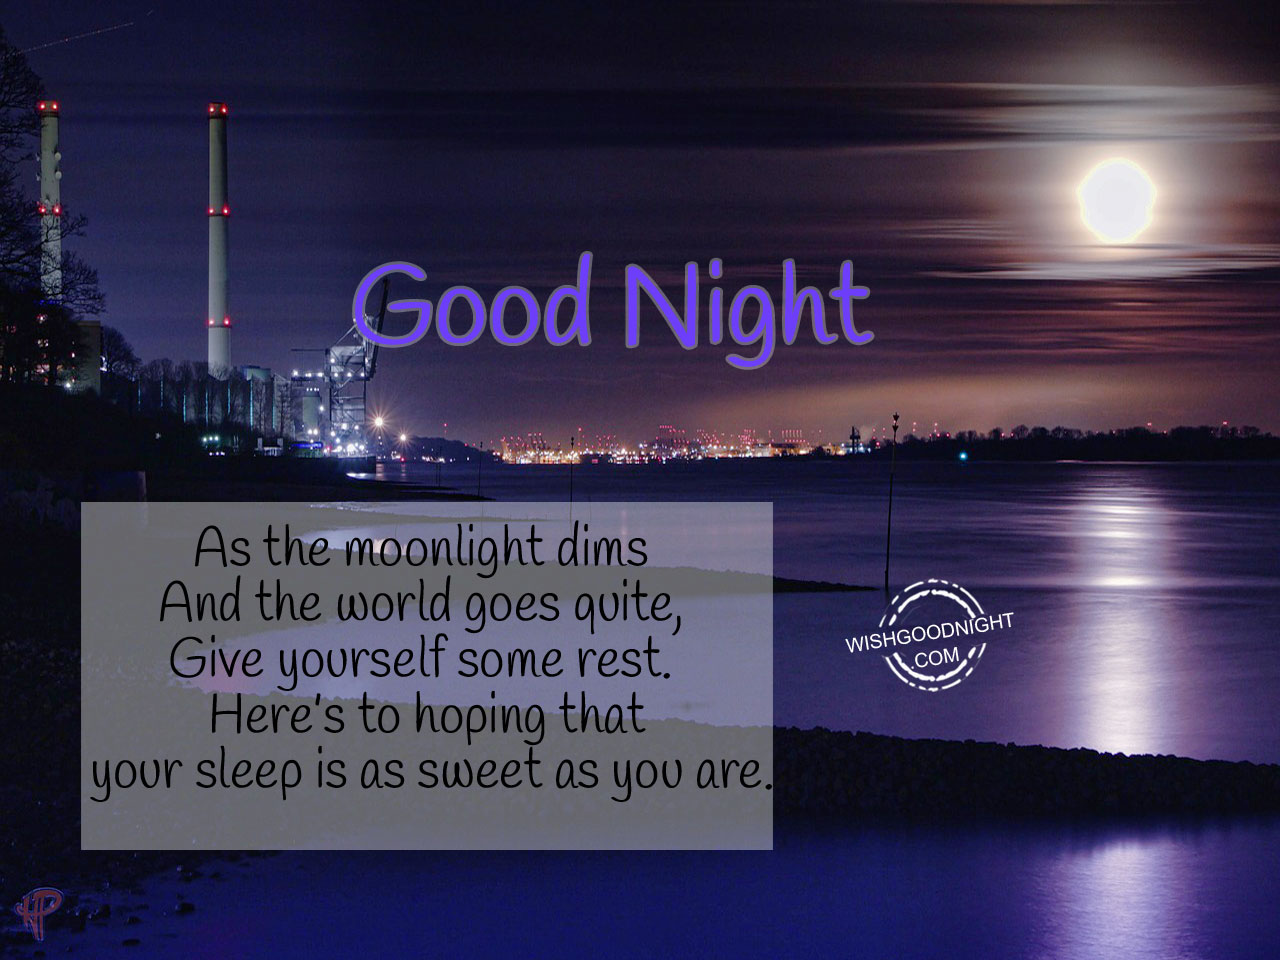 Your sleep is as sweet as you are - Good Night Pictures – WishGoodNight.com